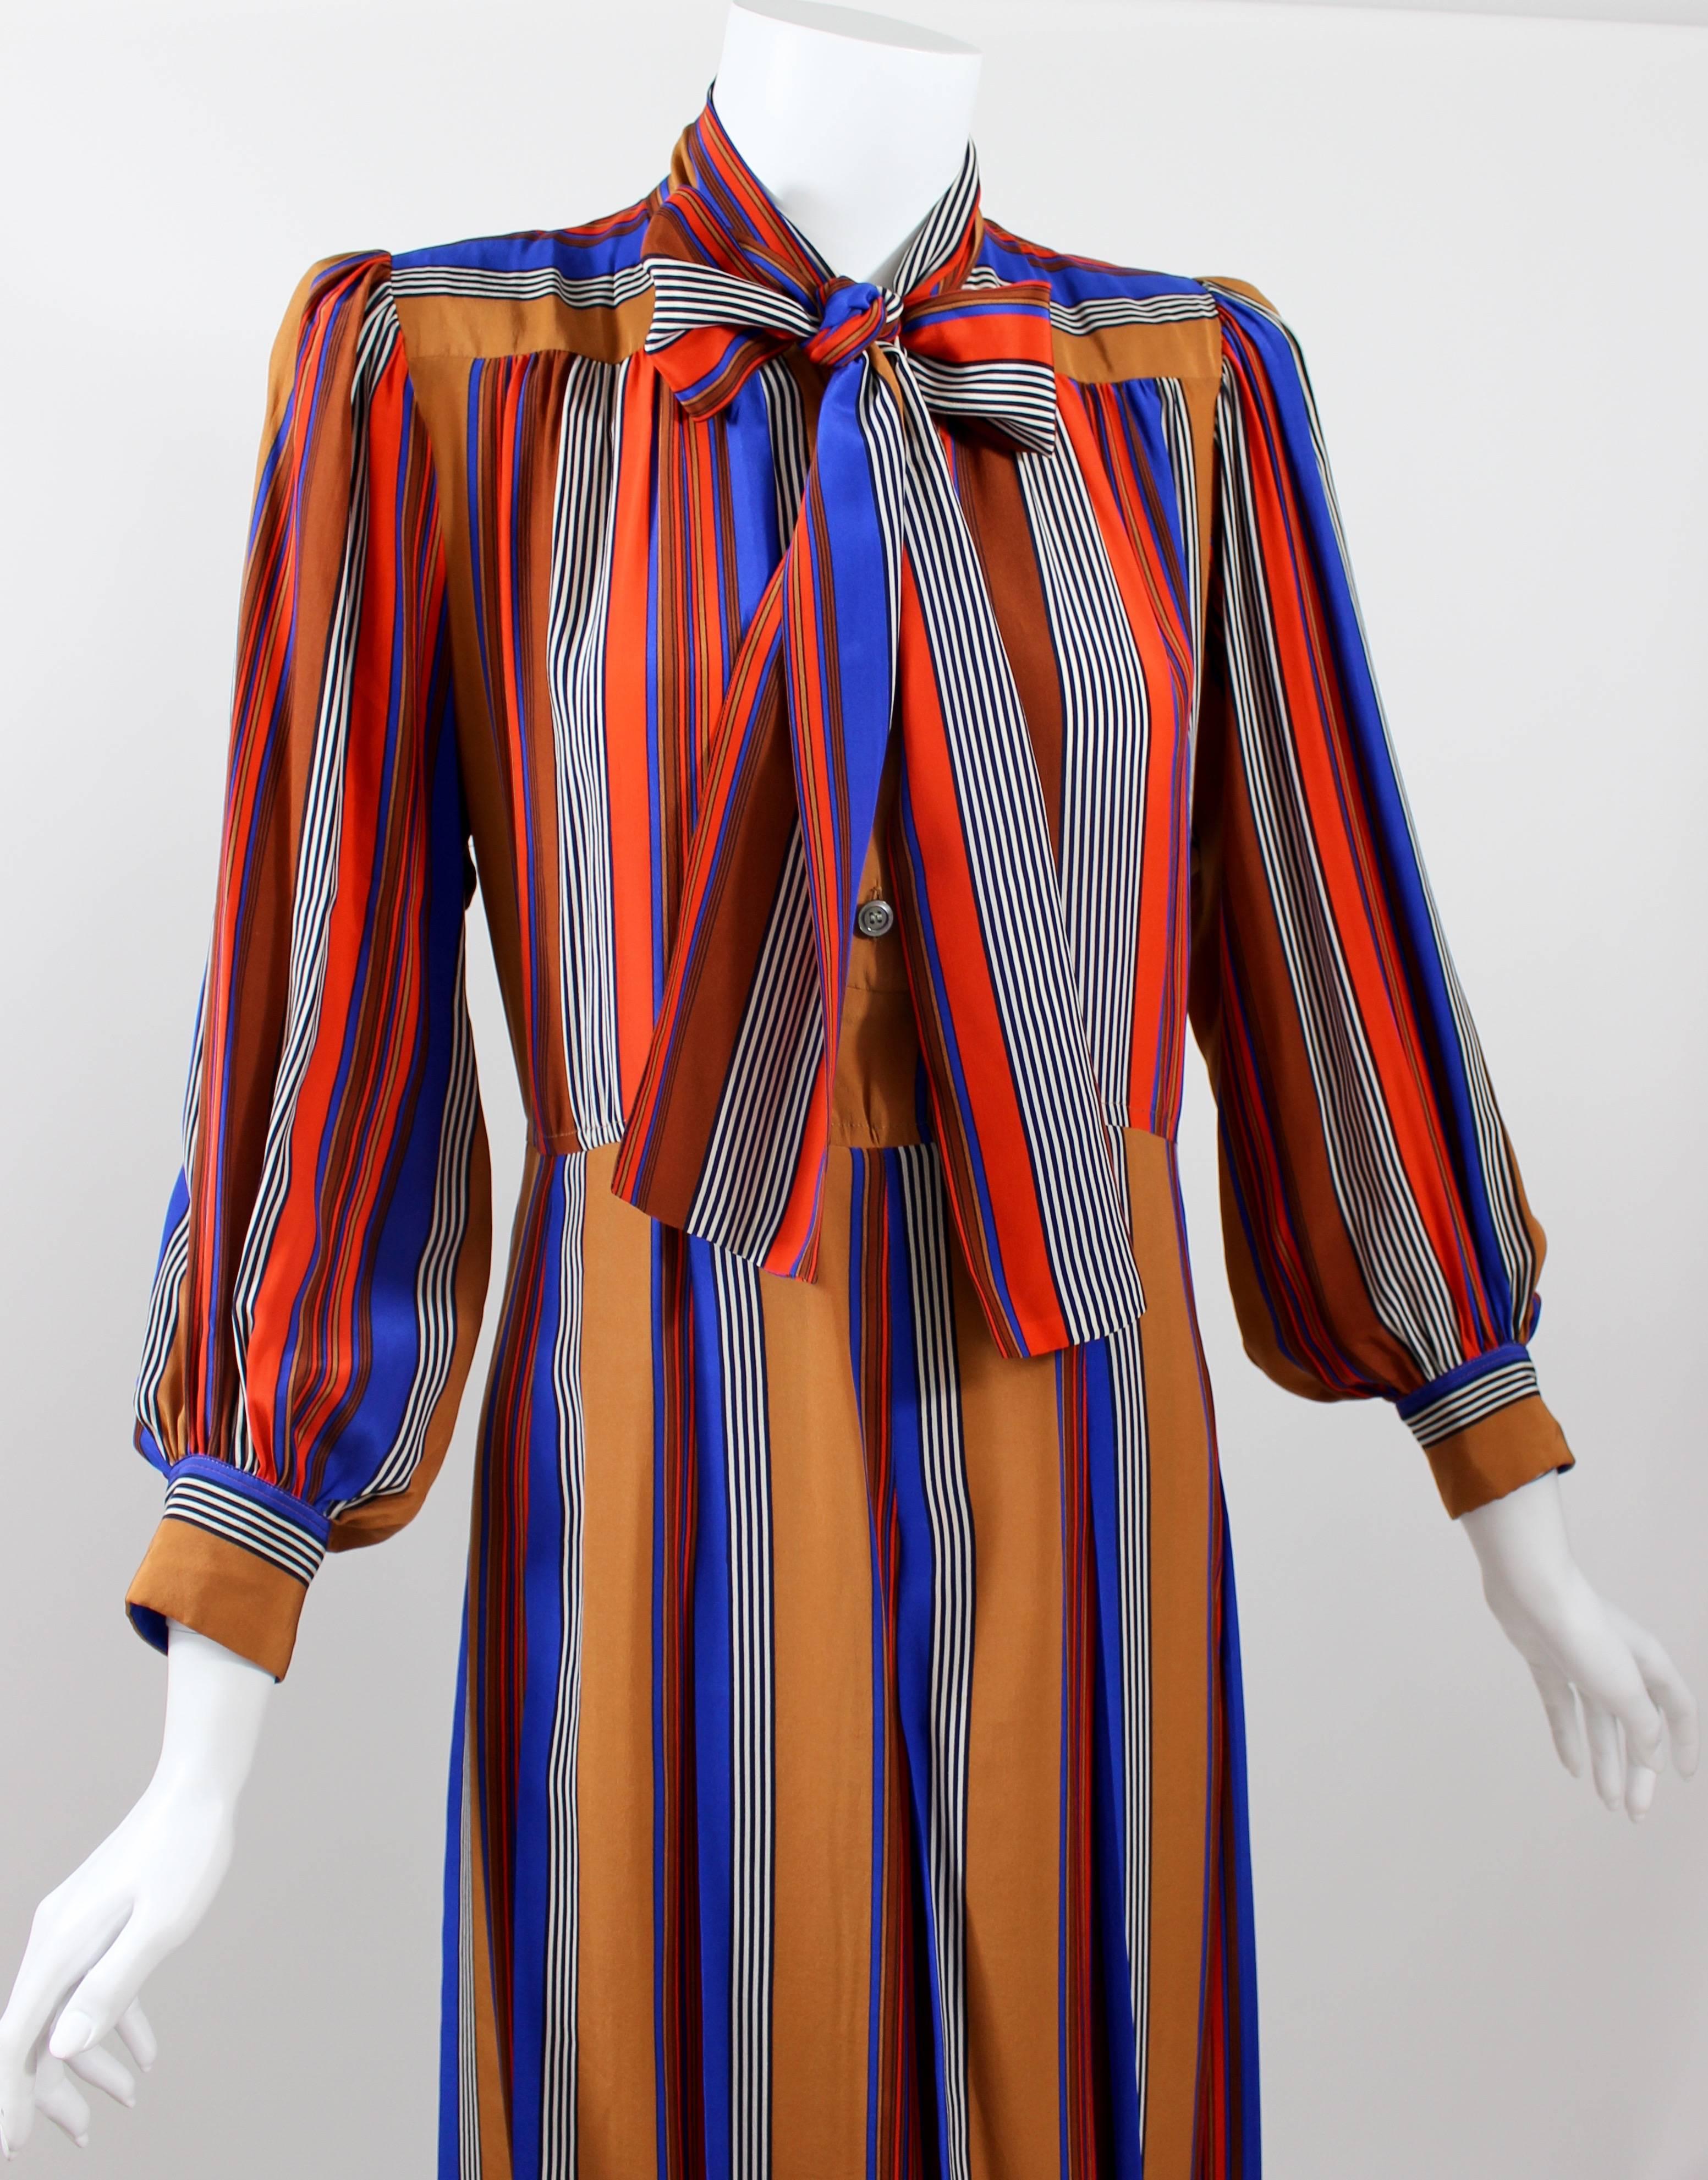 Vintage Yves Saint Laurent Striped Silk Dress In Excellent Condition For Sale In Boca Raton, FL